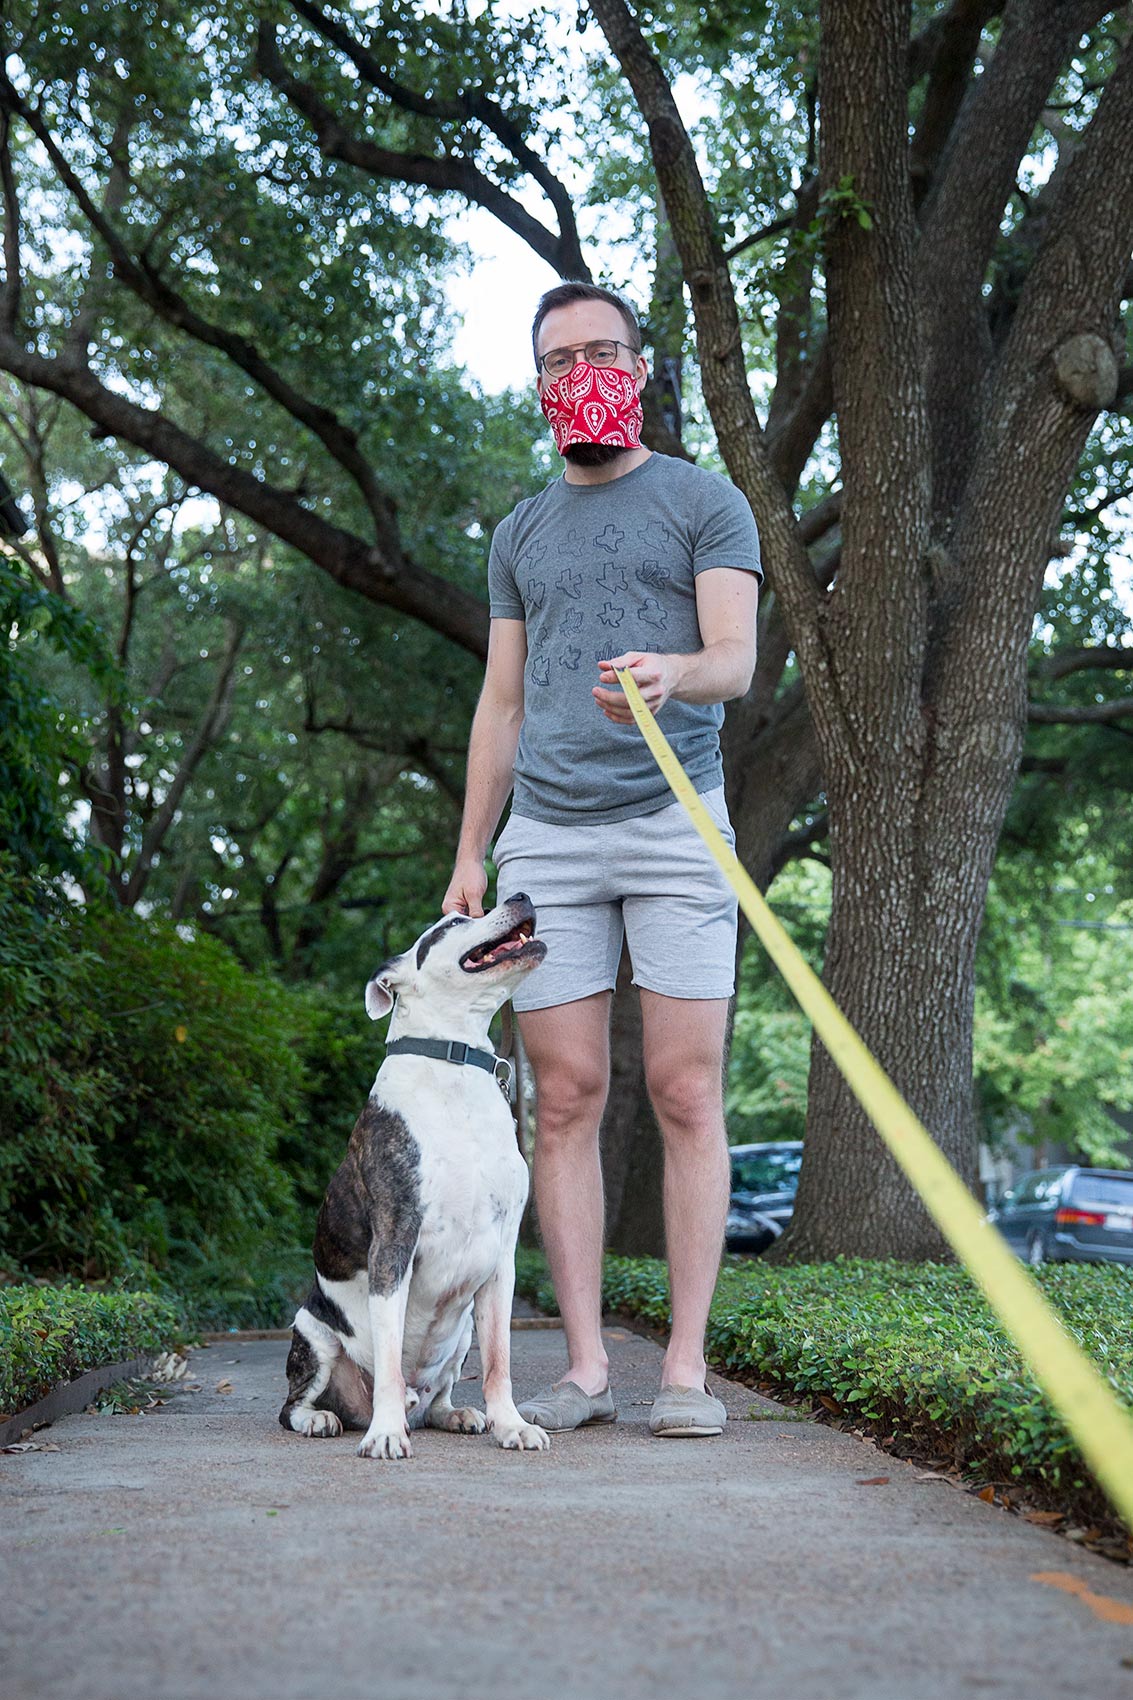 A man walking his dog holds a long tape measure as a symbol of Covid-19 social distancing